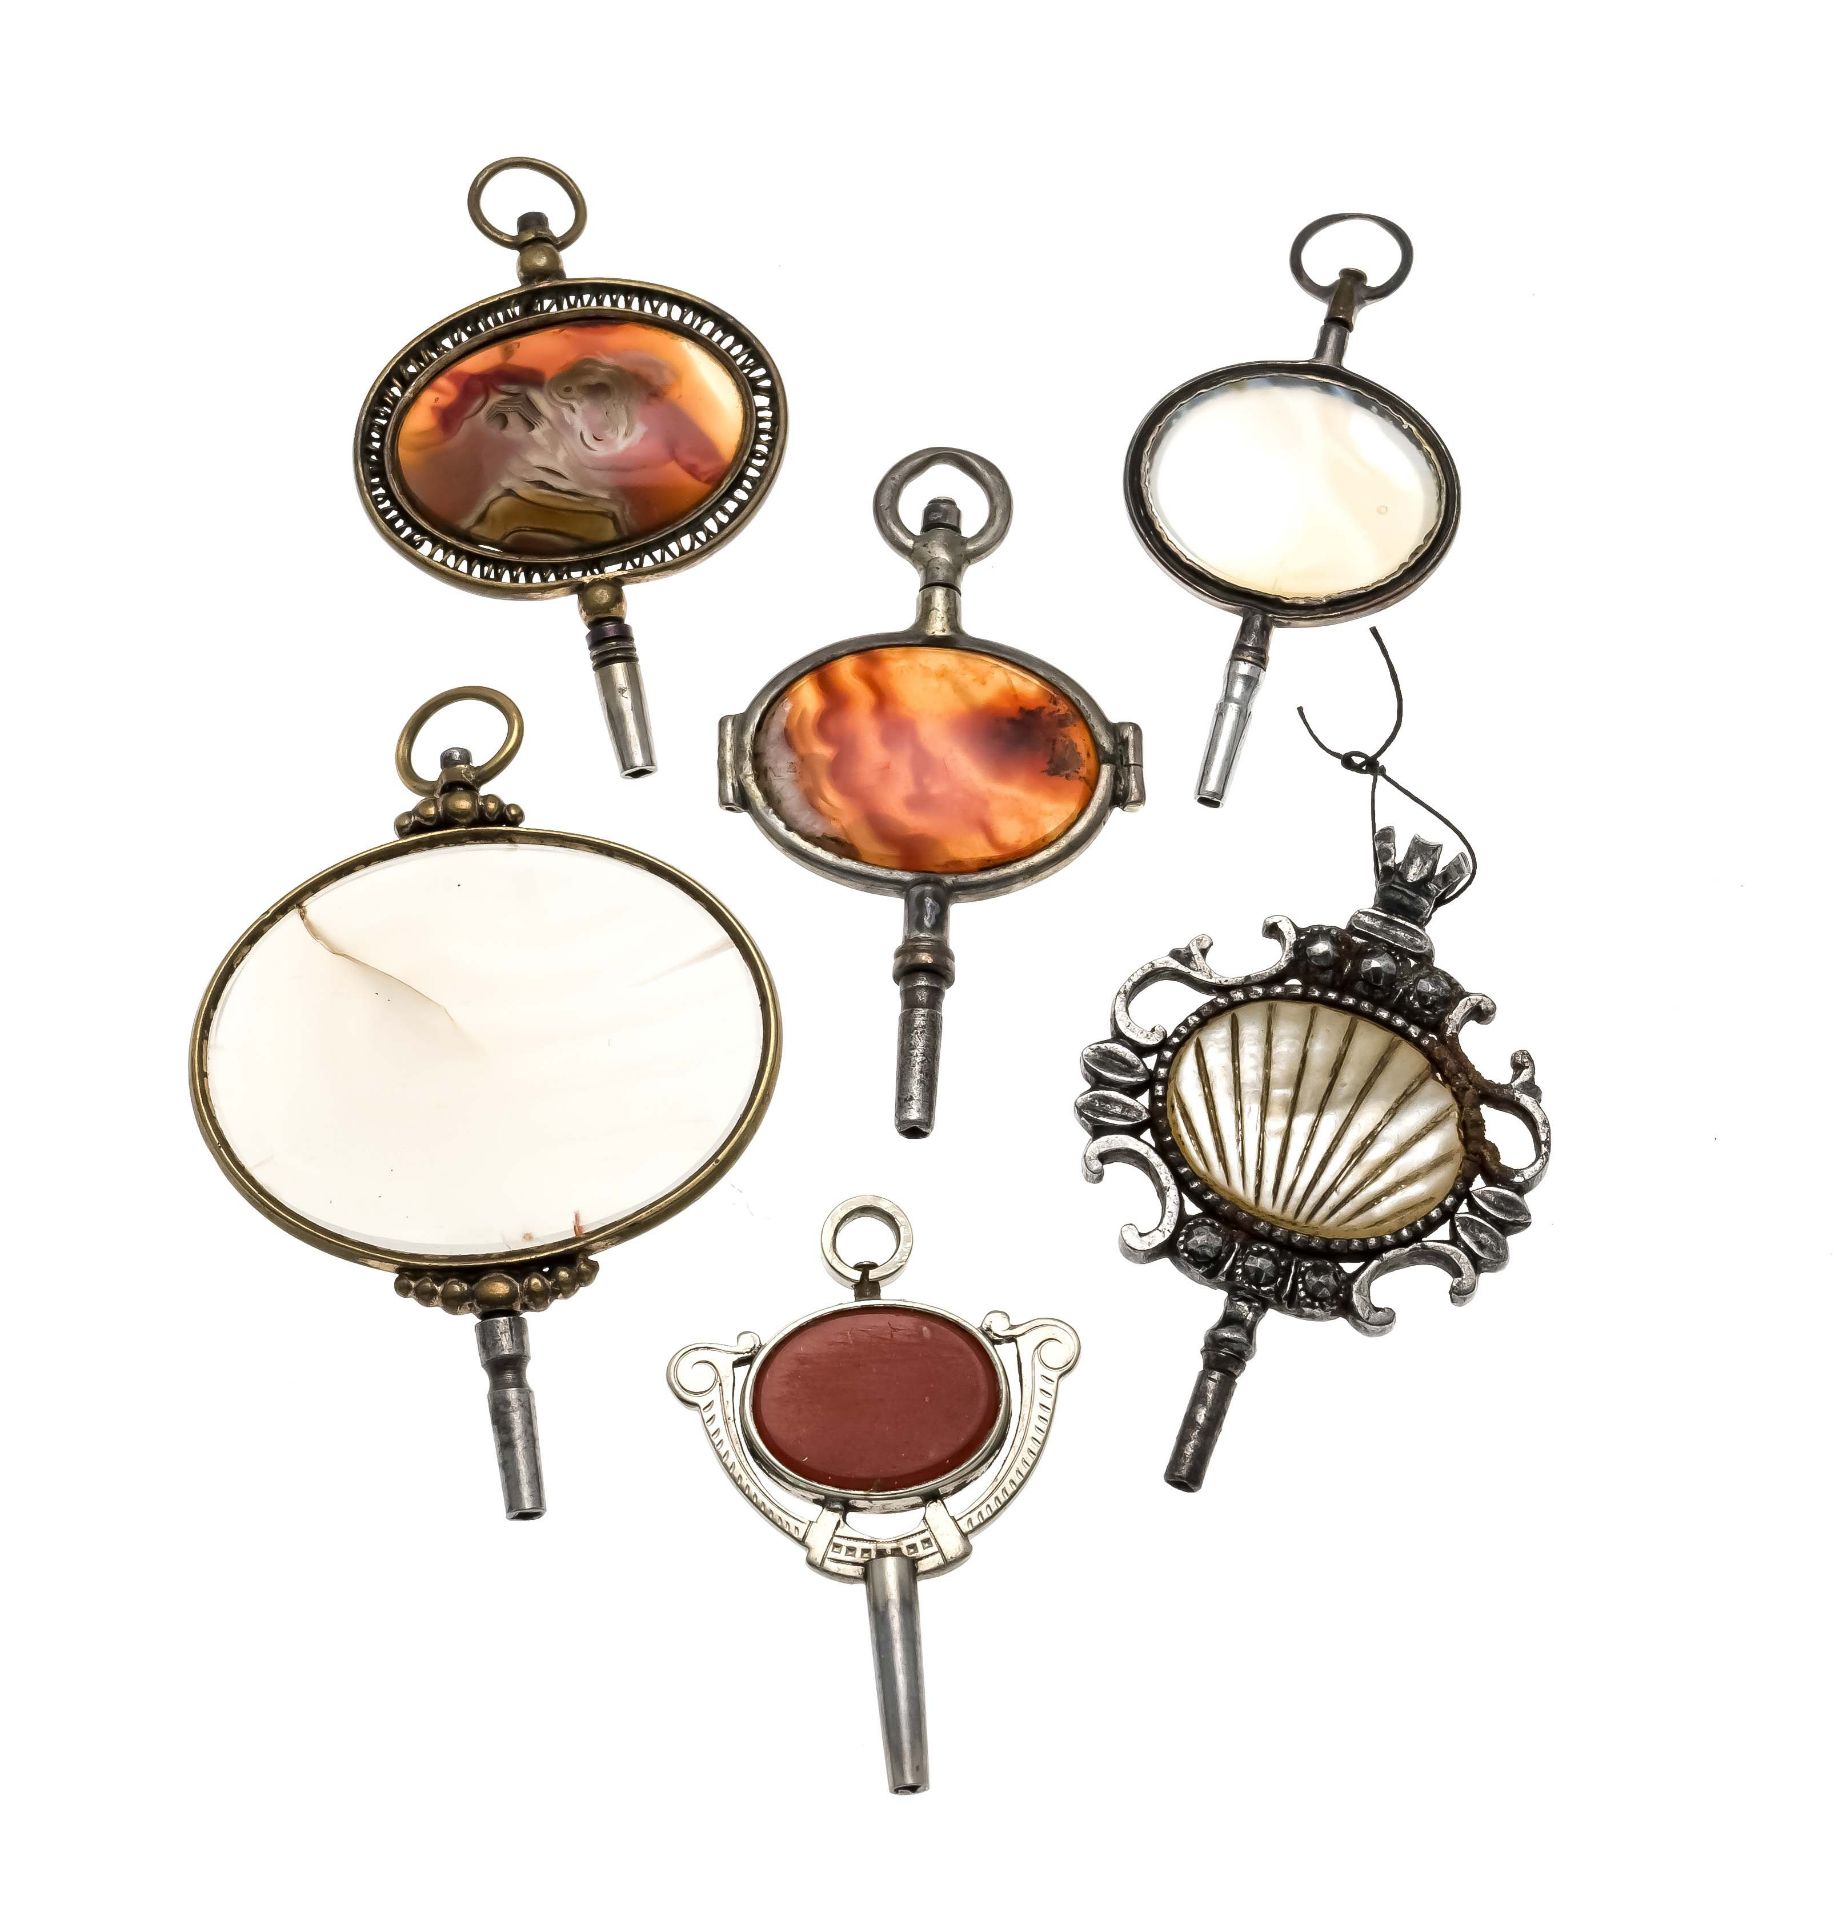 6 antique pocket watch keys, 18th and 19th century, various stones such as agate, carnelian,